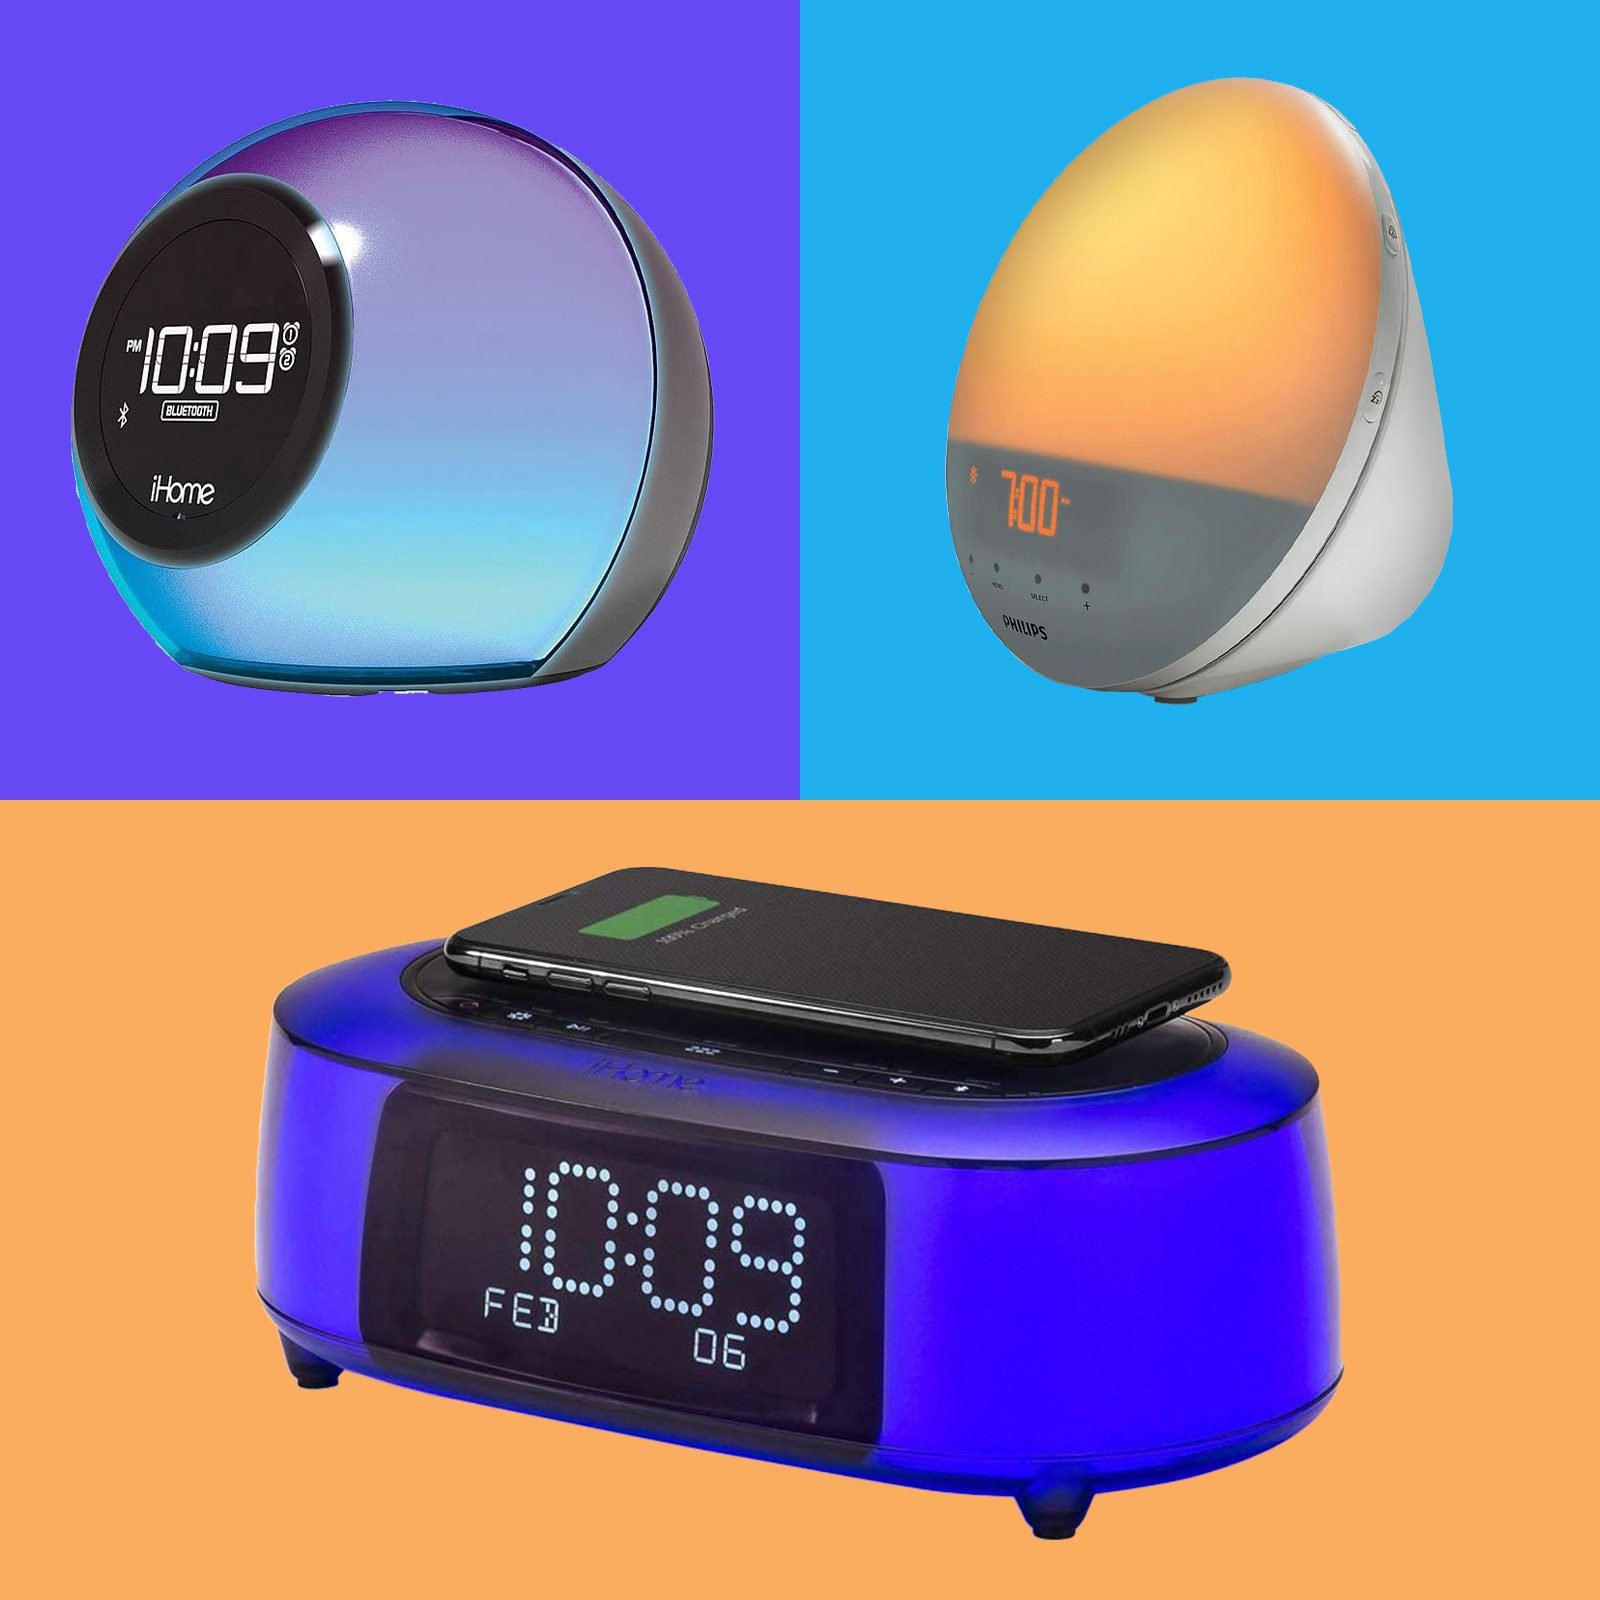 10 Smart Alarm Get in 2022: The Alarm Clock for You